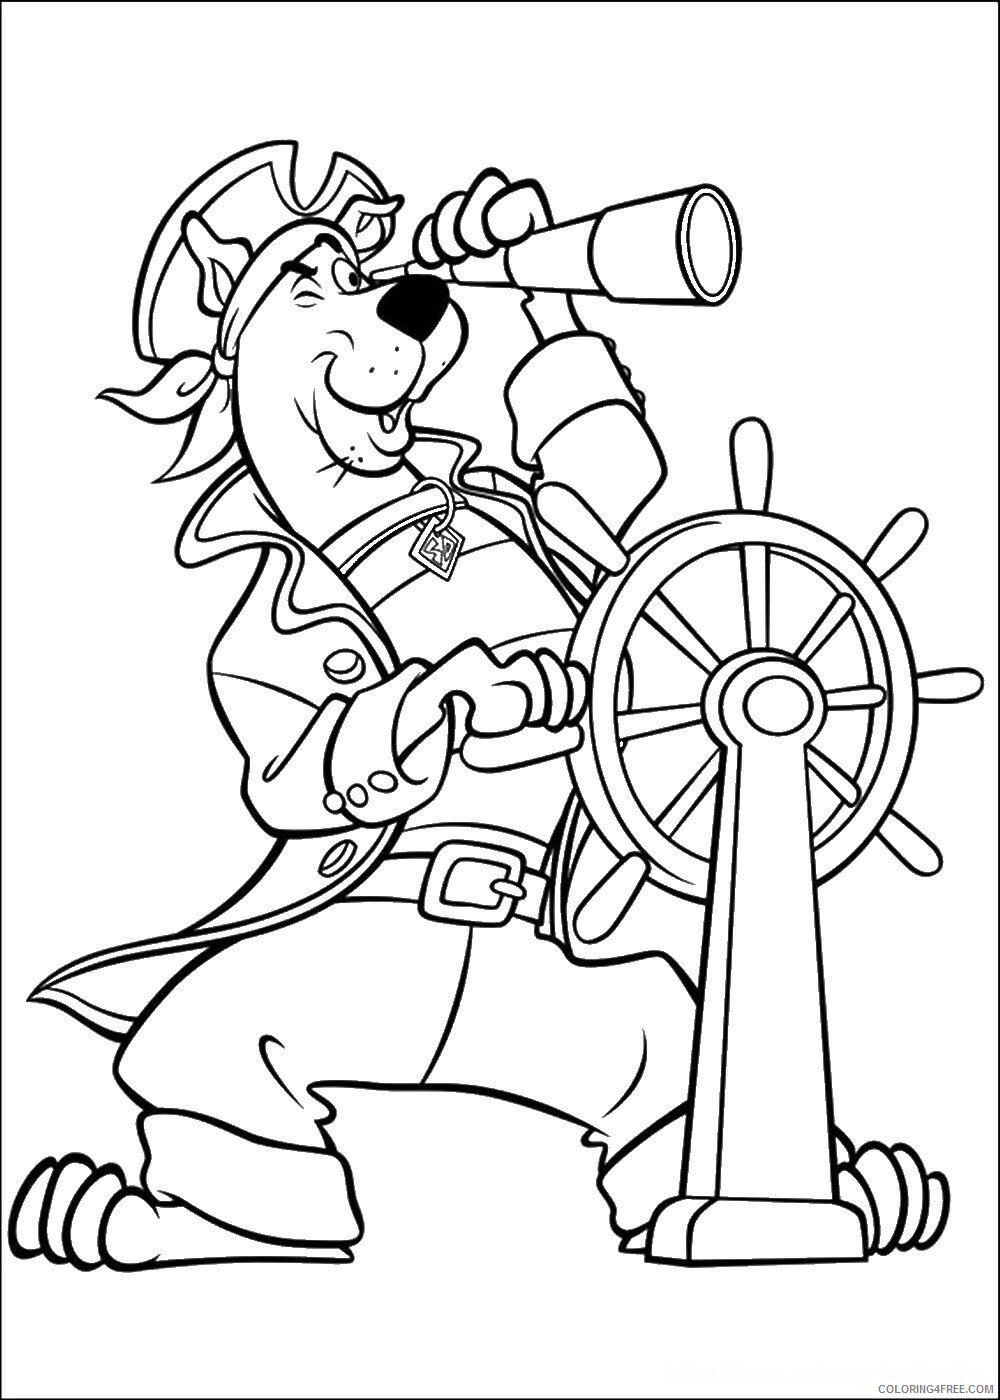 Scooby Doo Coloring Pages TV Film scooby_doo_cl_24 Printable 2020 07271 Coloring4free